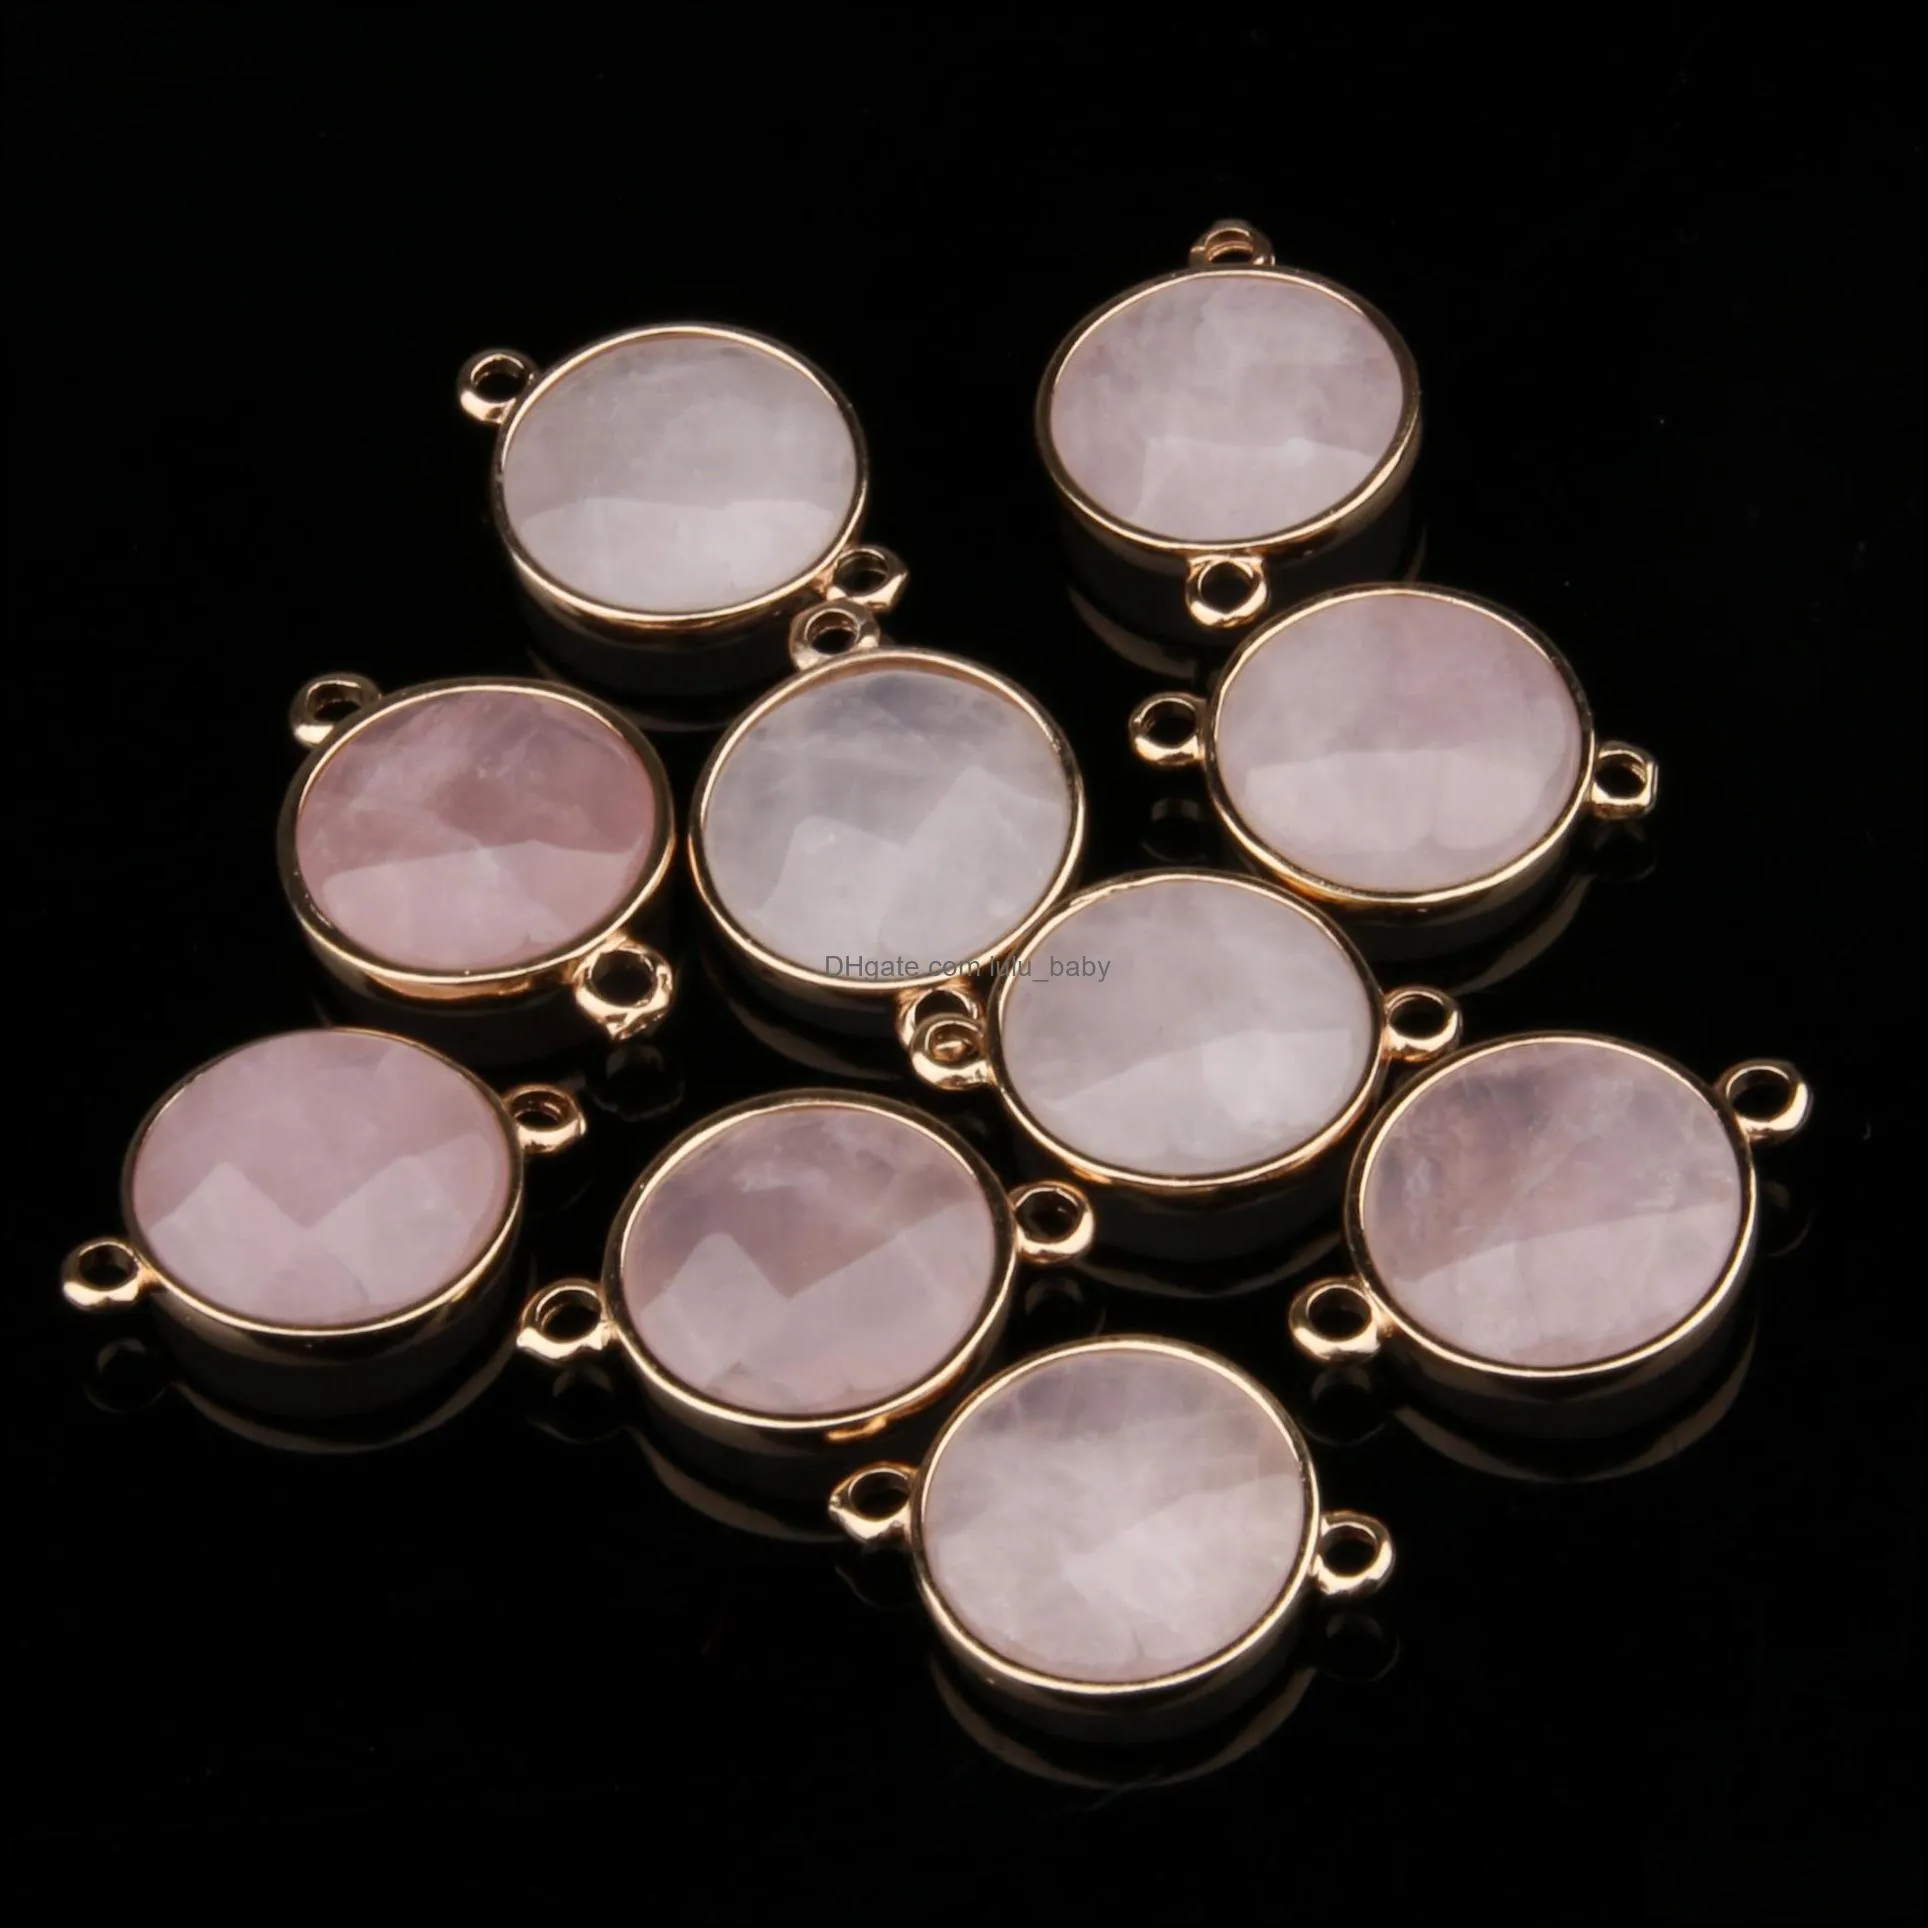 round shape natural stone rose quartz tiger eyes opal pendant charms diy for druzy bracelet necklace earrings jewelry making